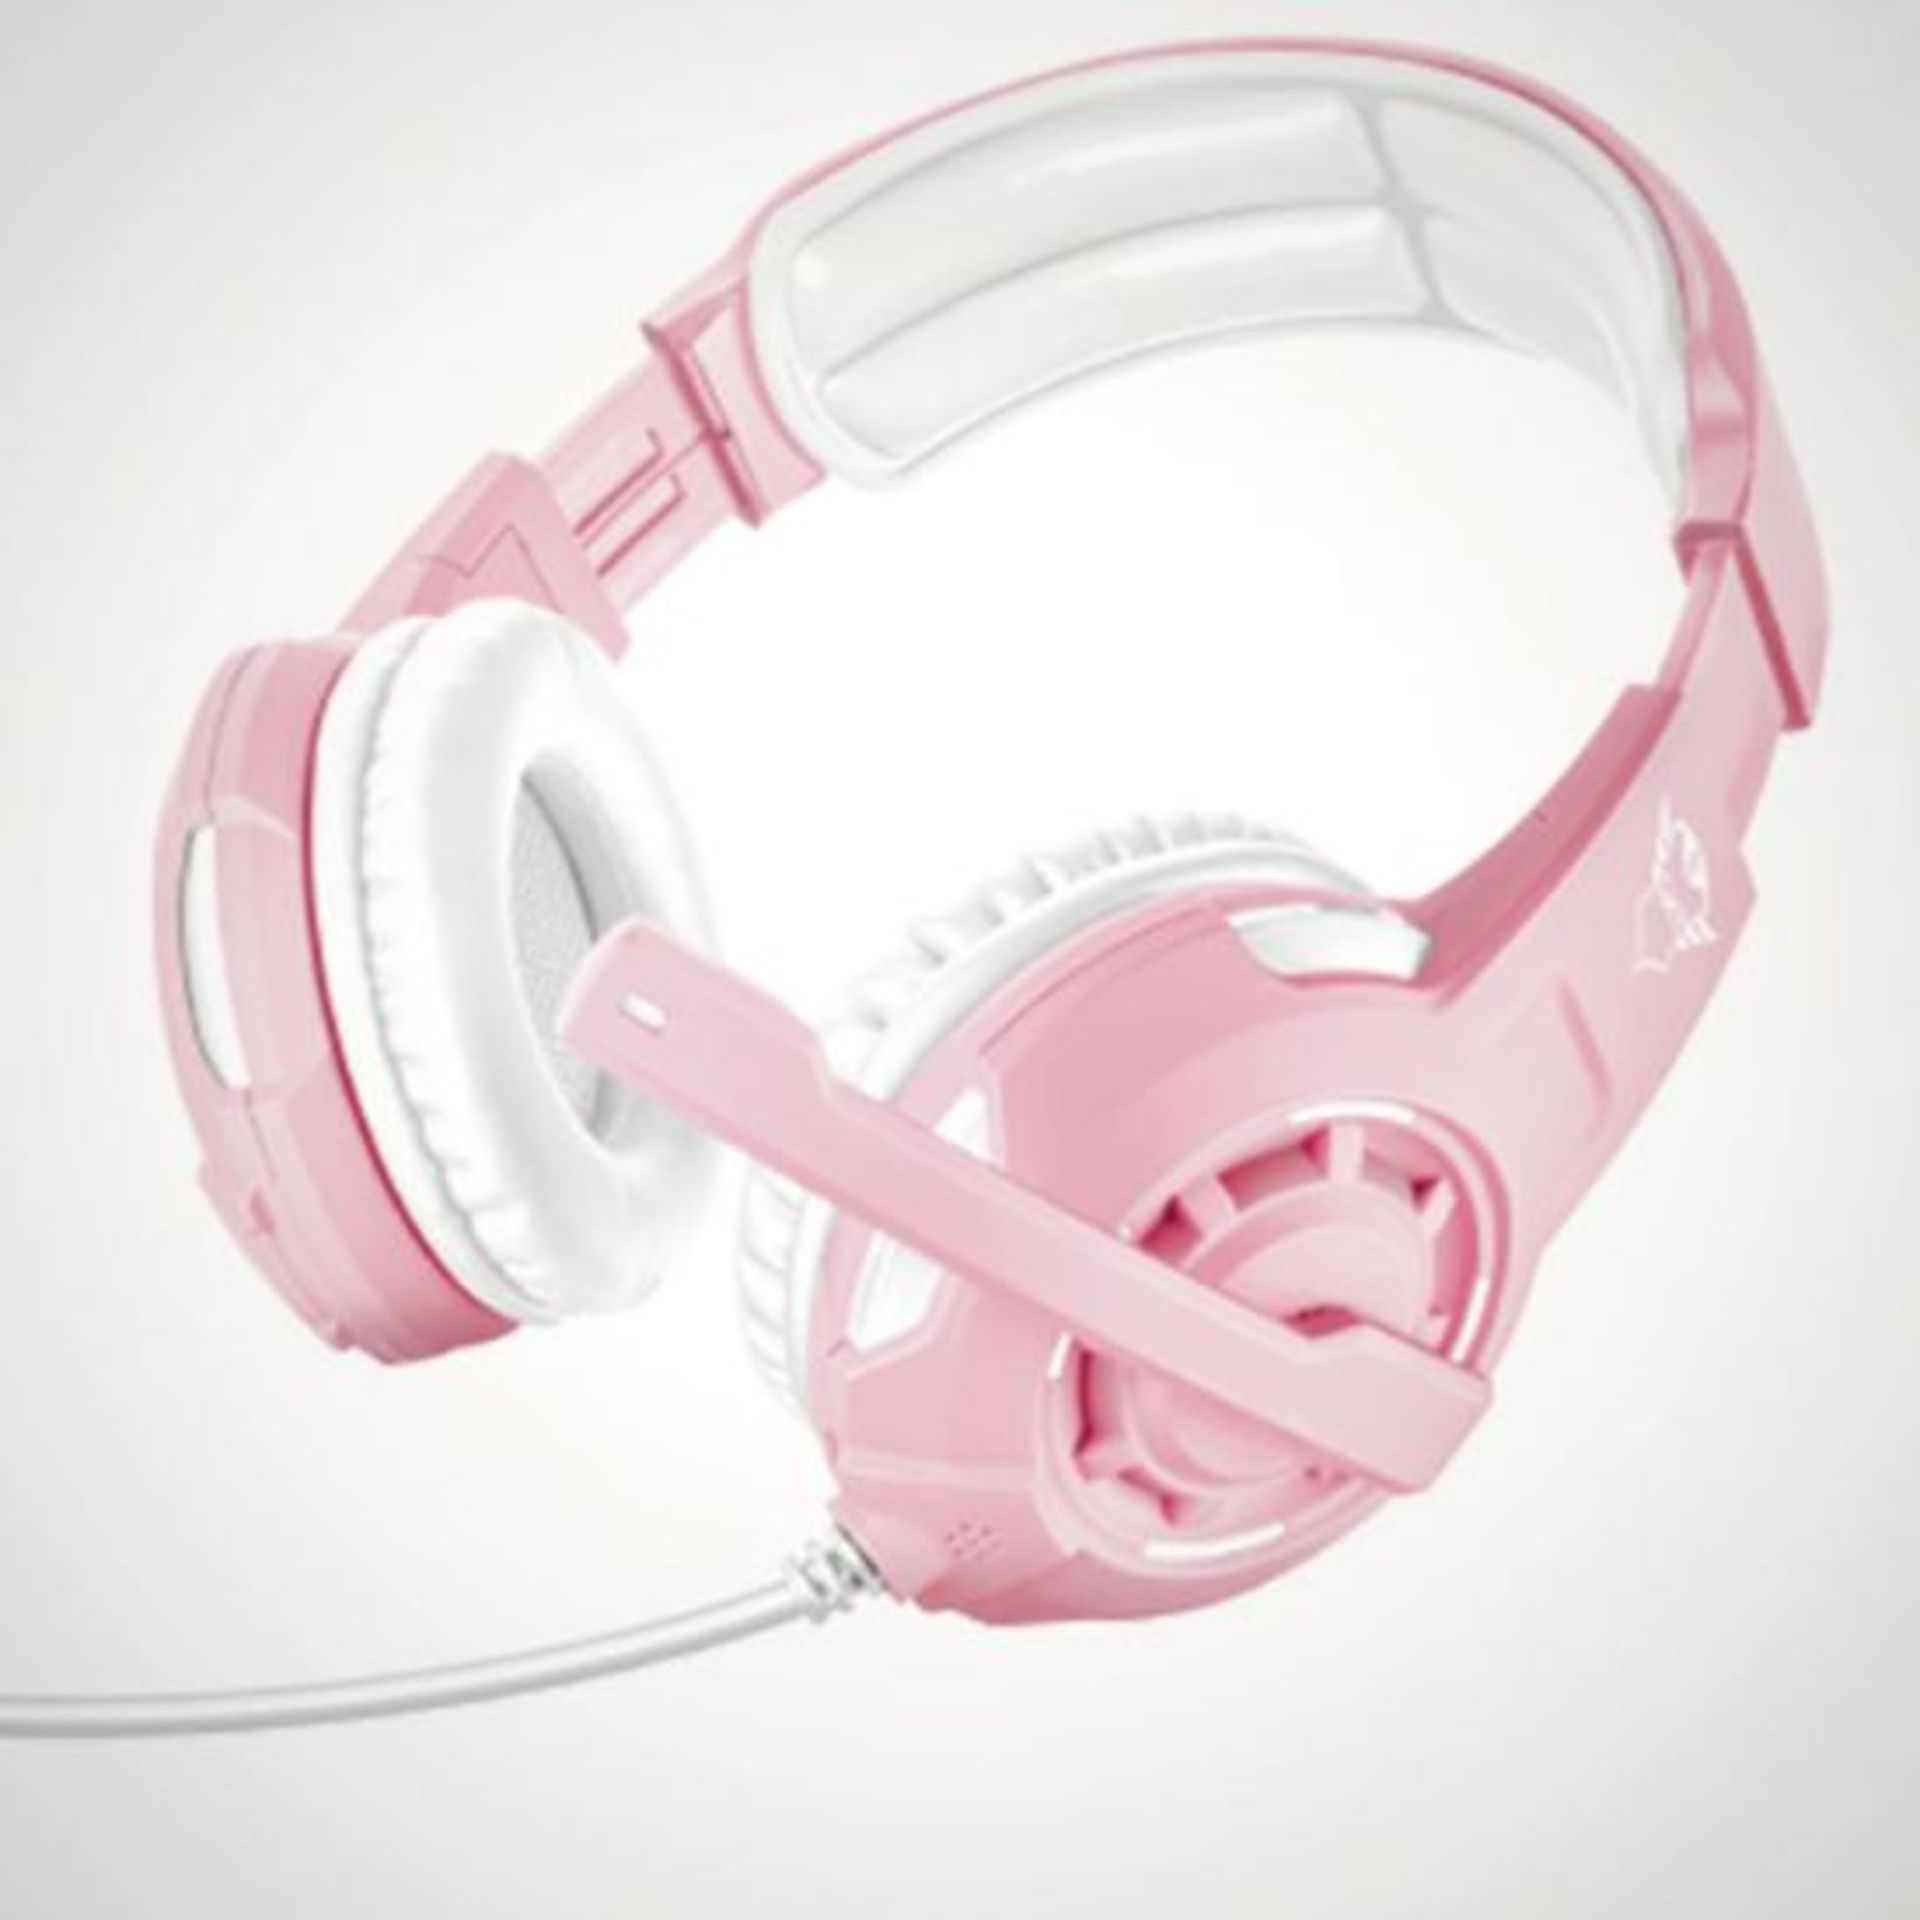 (P2) 5x Trust GXT Radius Pink Edition Gaming Headset RRP £19.99 Each. (Units Have Return To Manufa